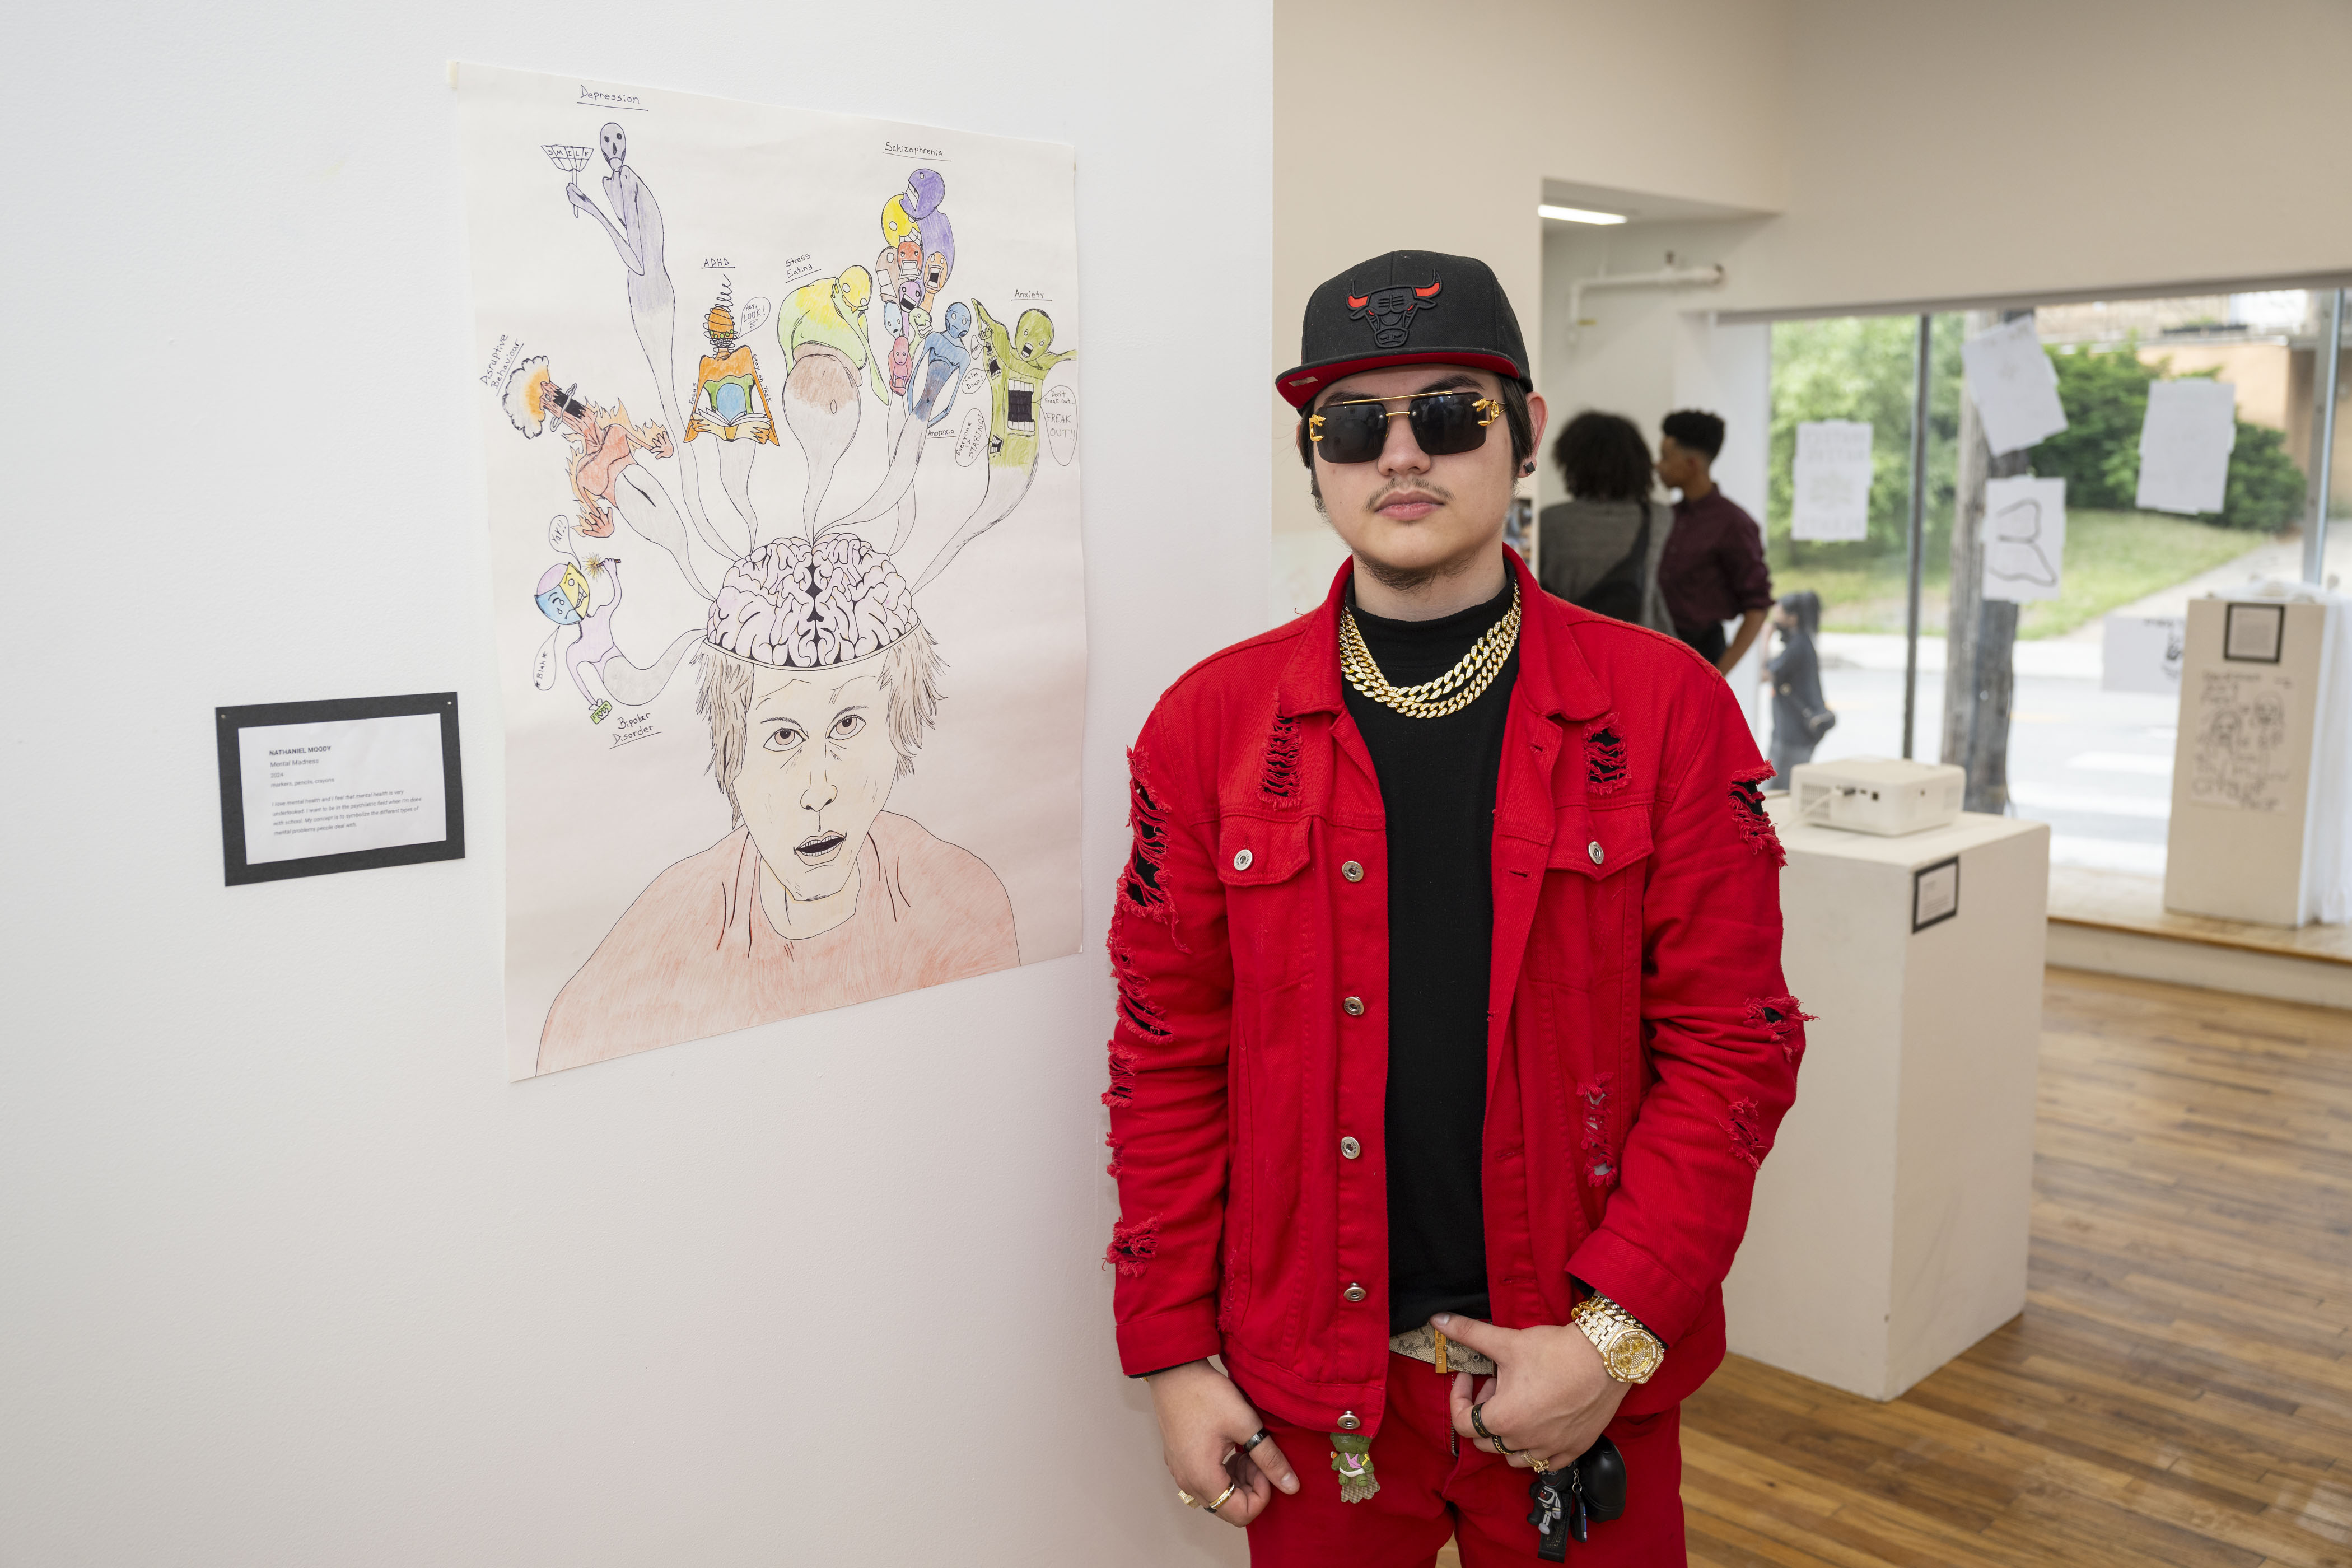 LEAP student, Nate, standing next to a drawing he created